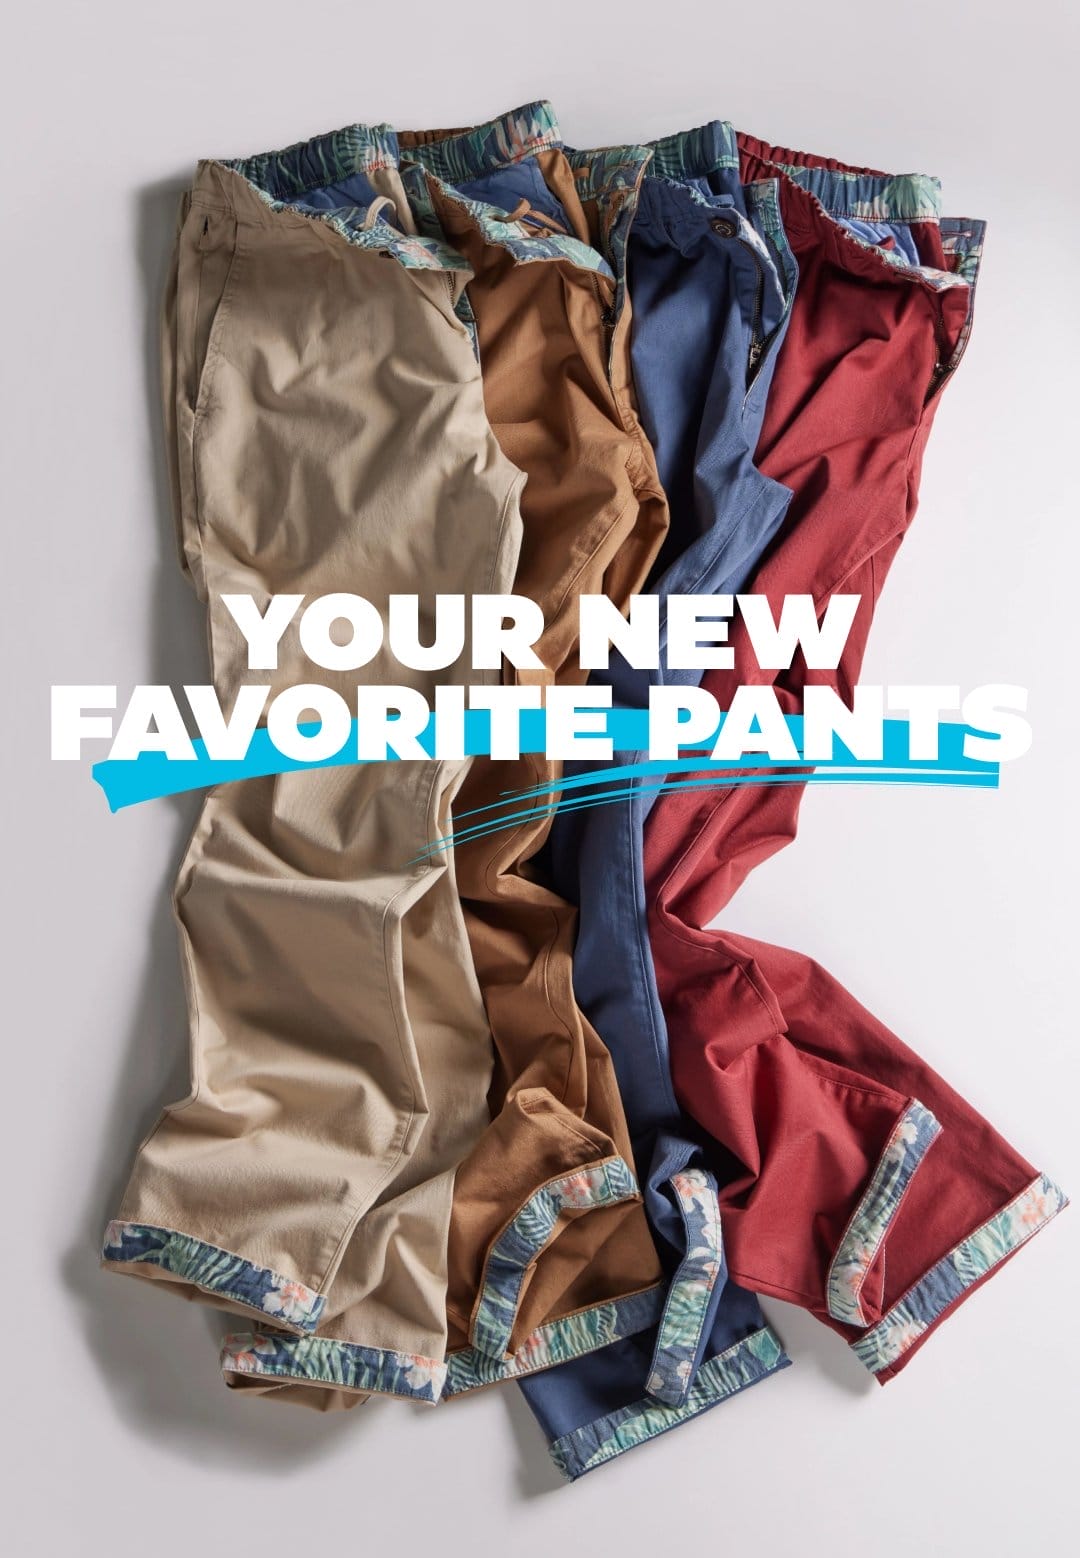 YOUR NEW FAVORITE PANTS